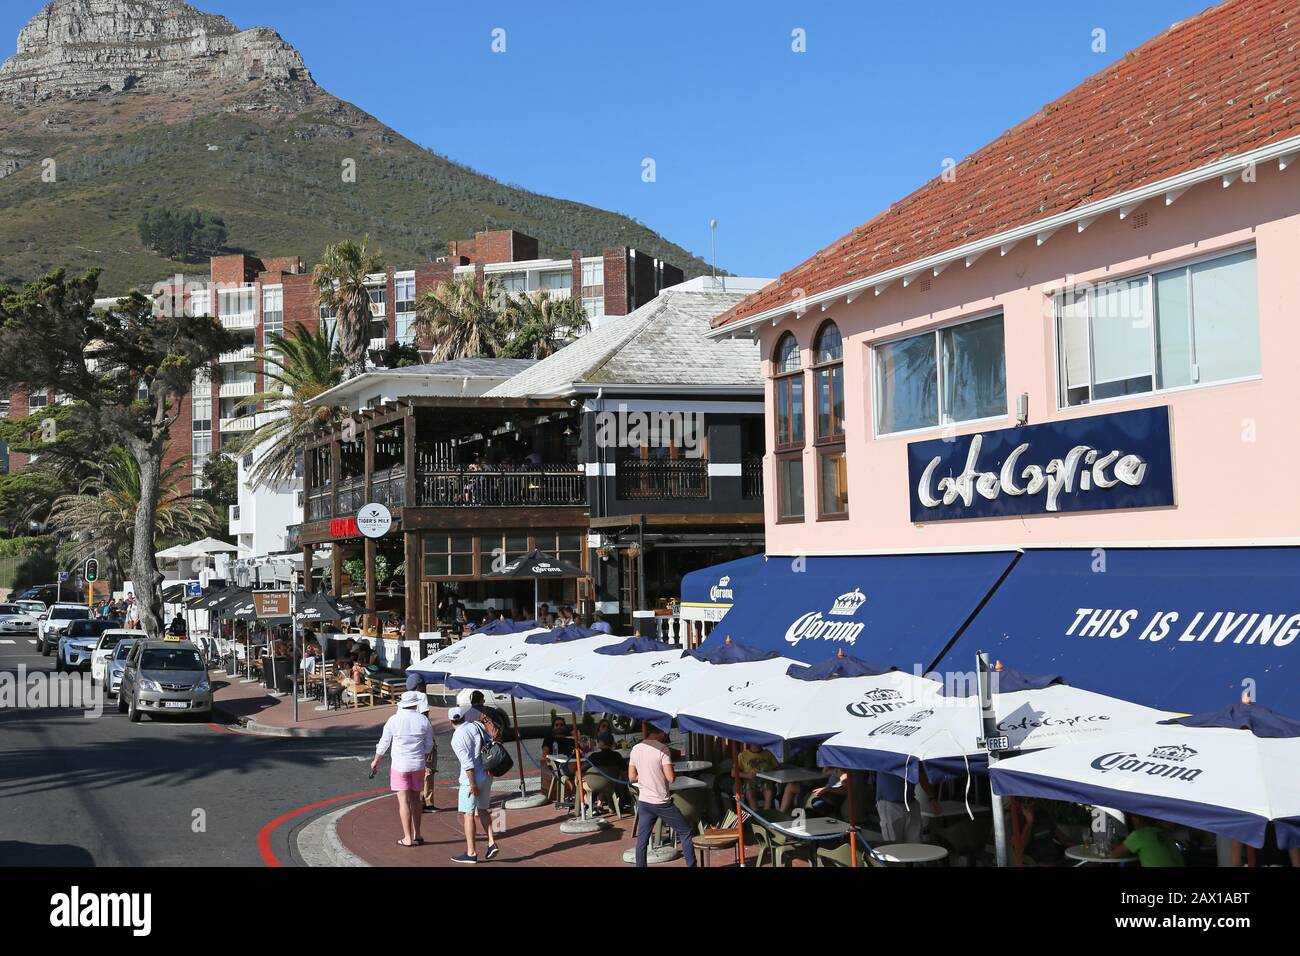 Tiger's Milk and Cafe Caprice, Victoria Street, Camps Bay, Cape Town, Table  Bay, Western Cape Province, South Africa, Africa Stock Photo - Alamy